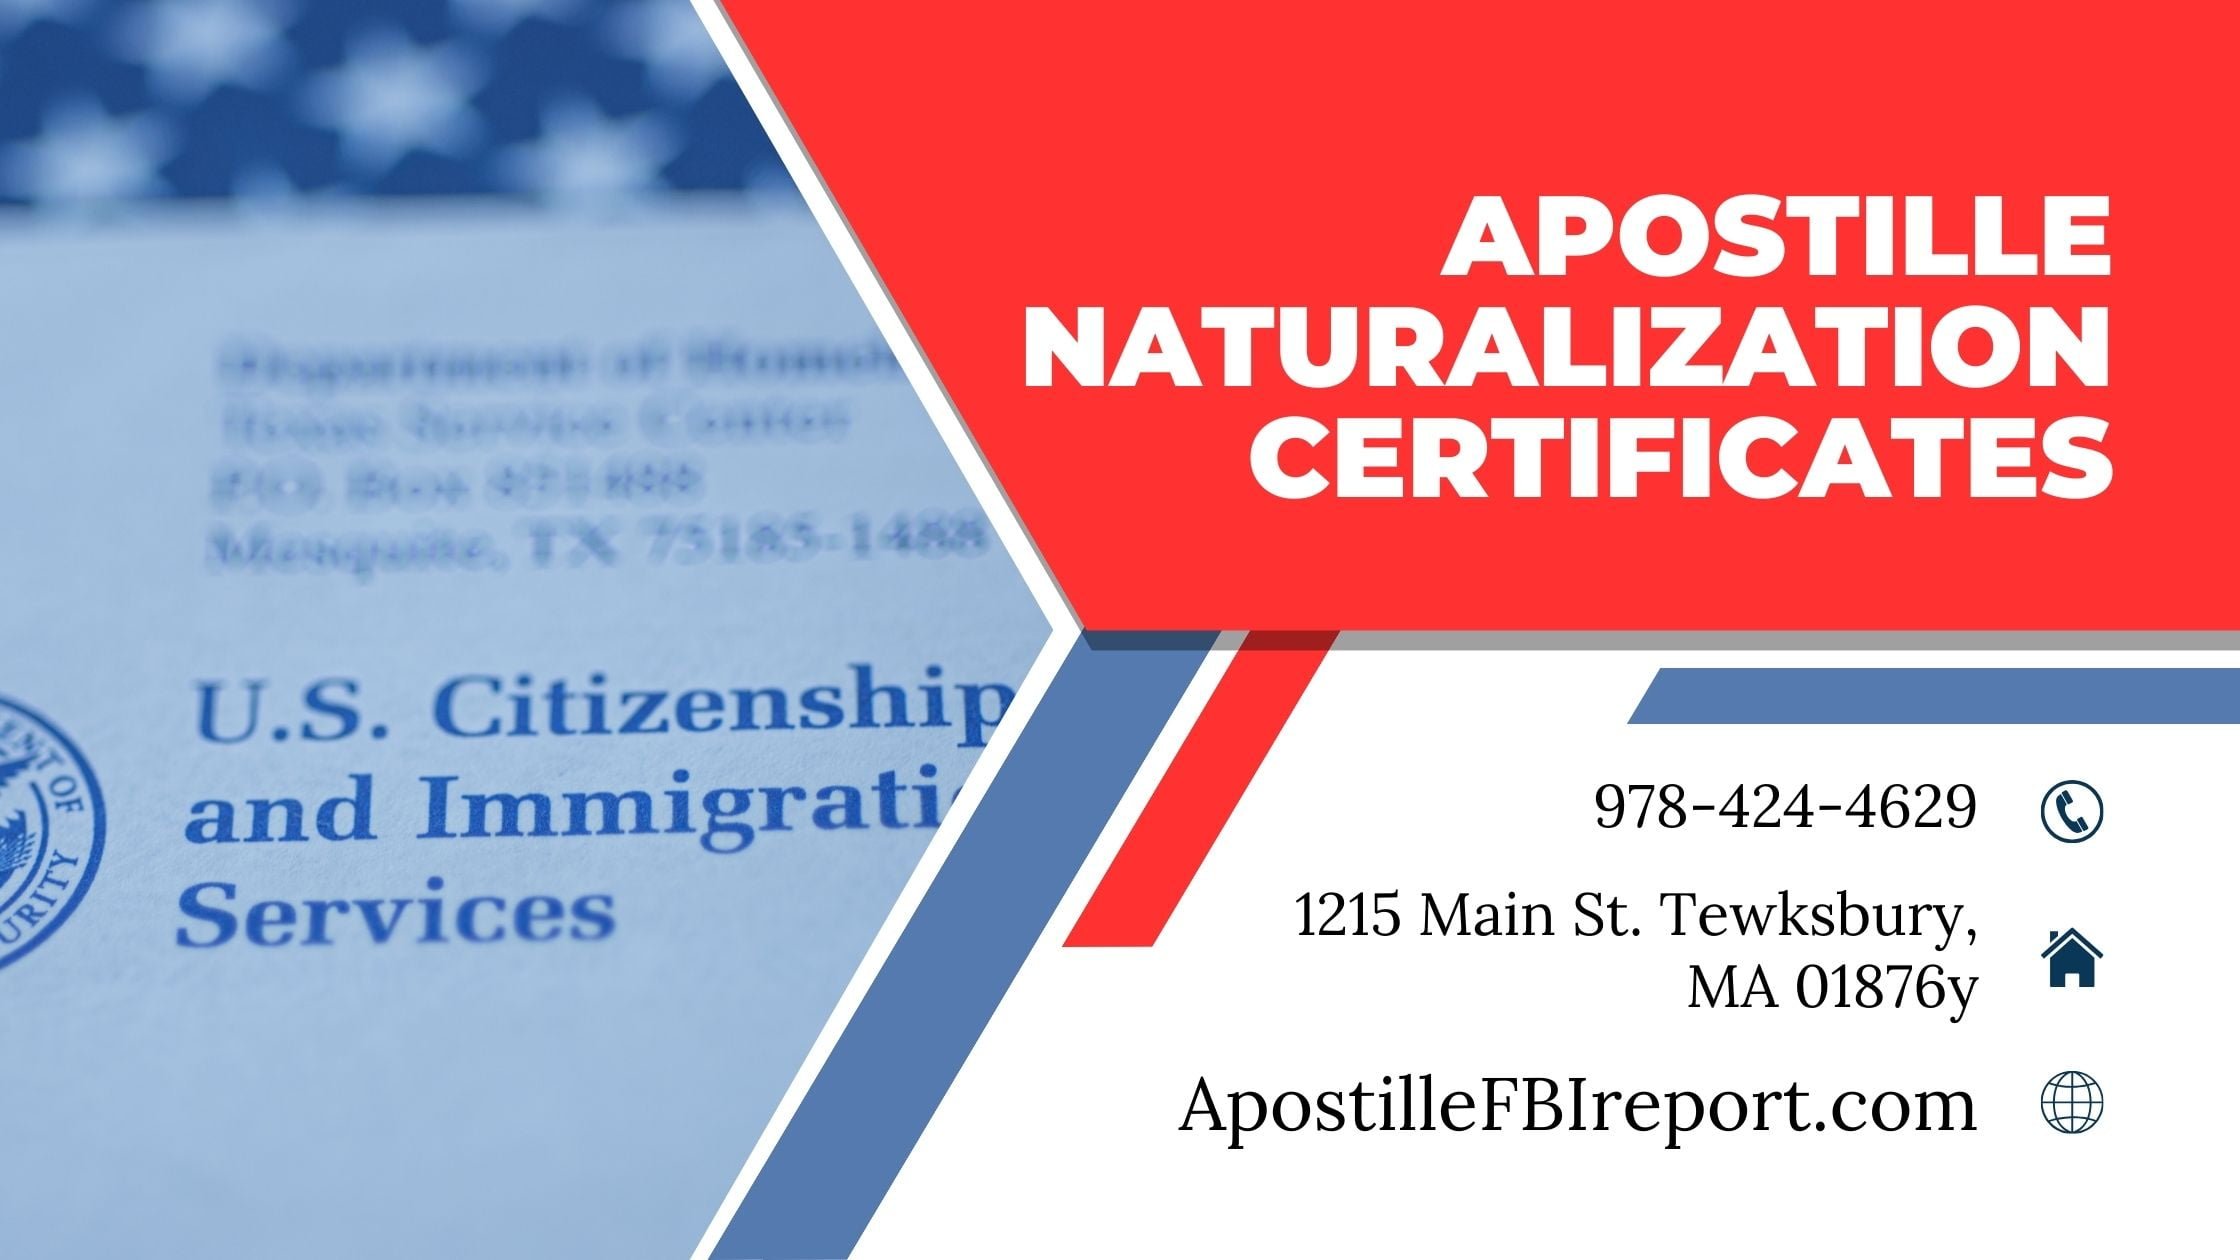 Apostille Your U.S. Naturalization Certificate Easily